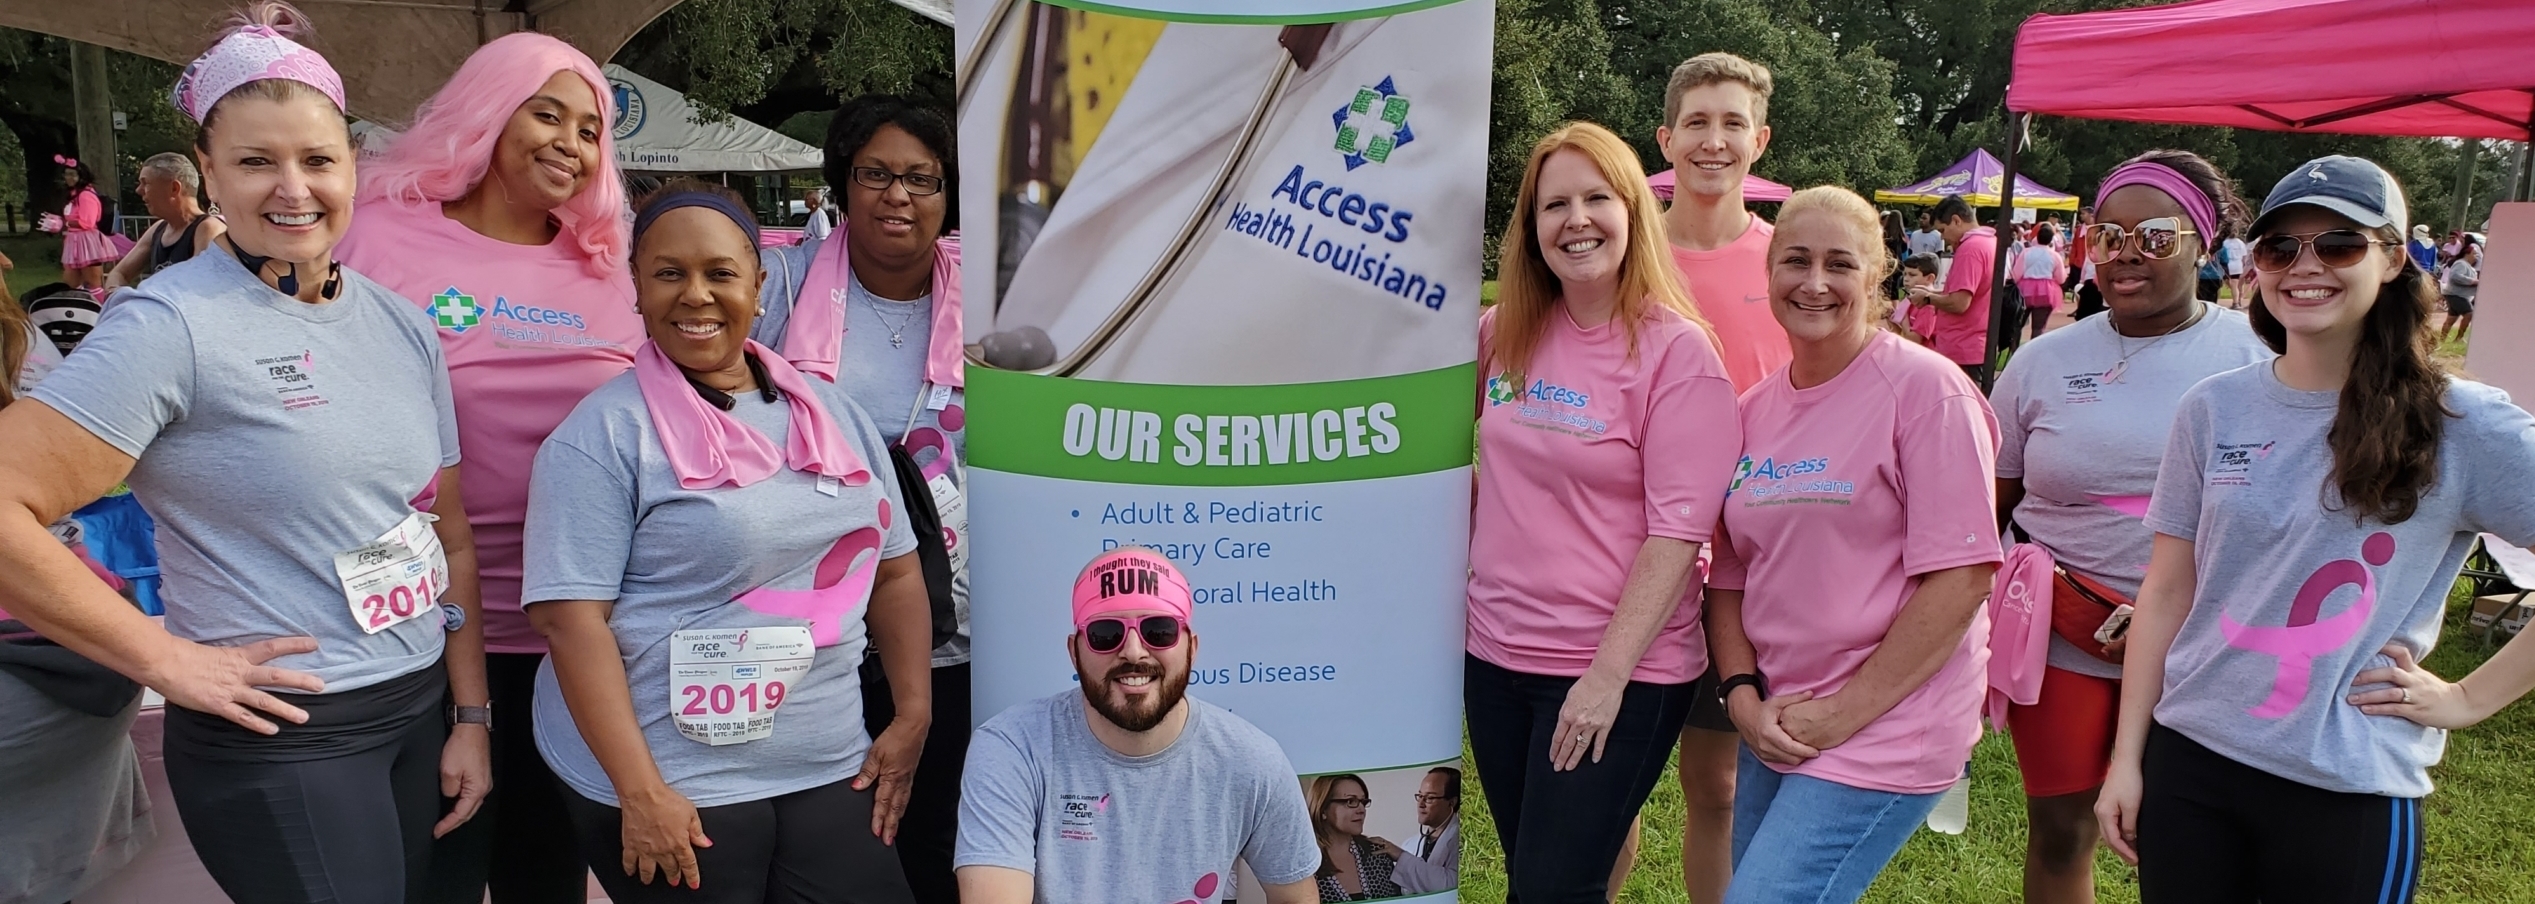 Join our Virtual Team for Komen's Race for the Cure Access Health